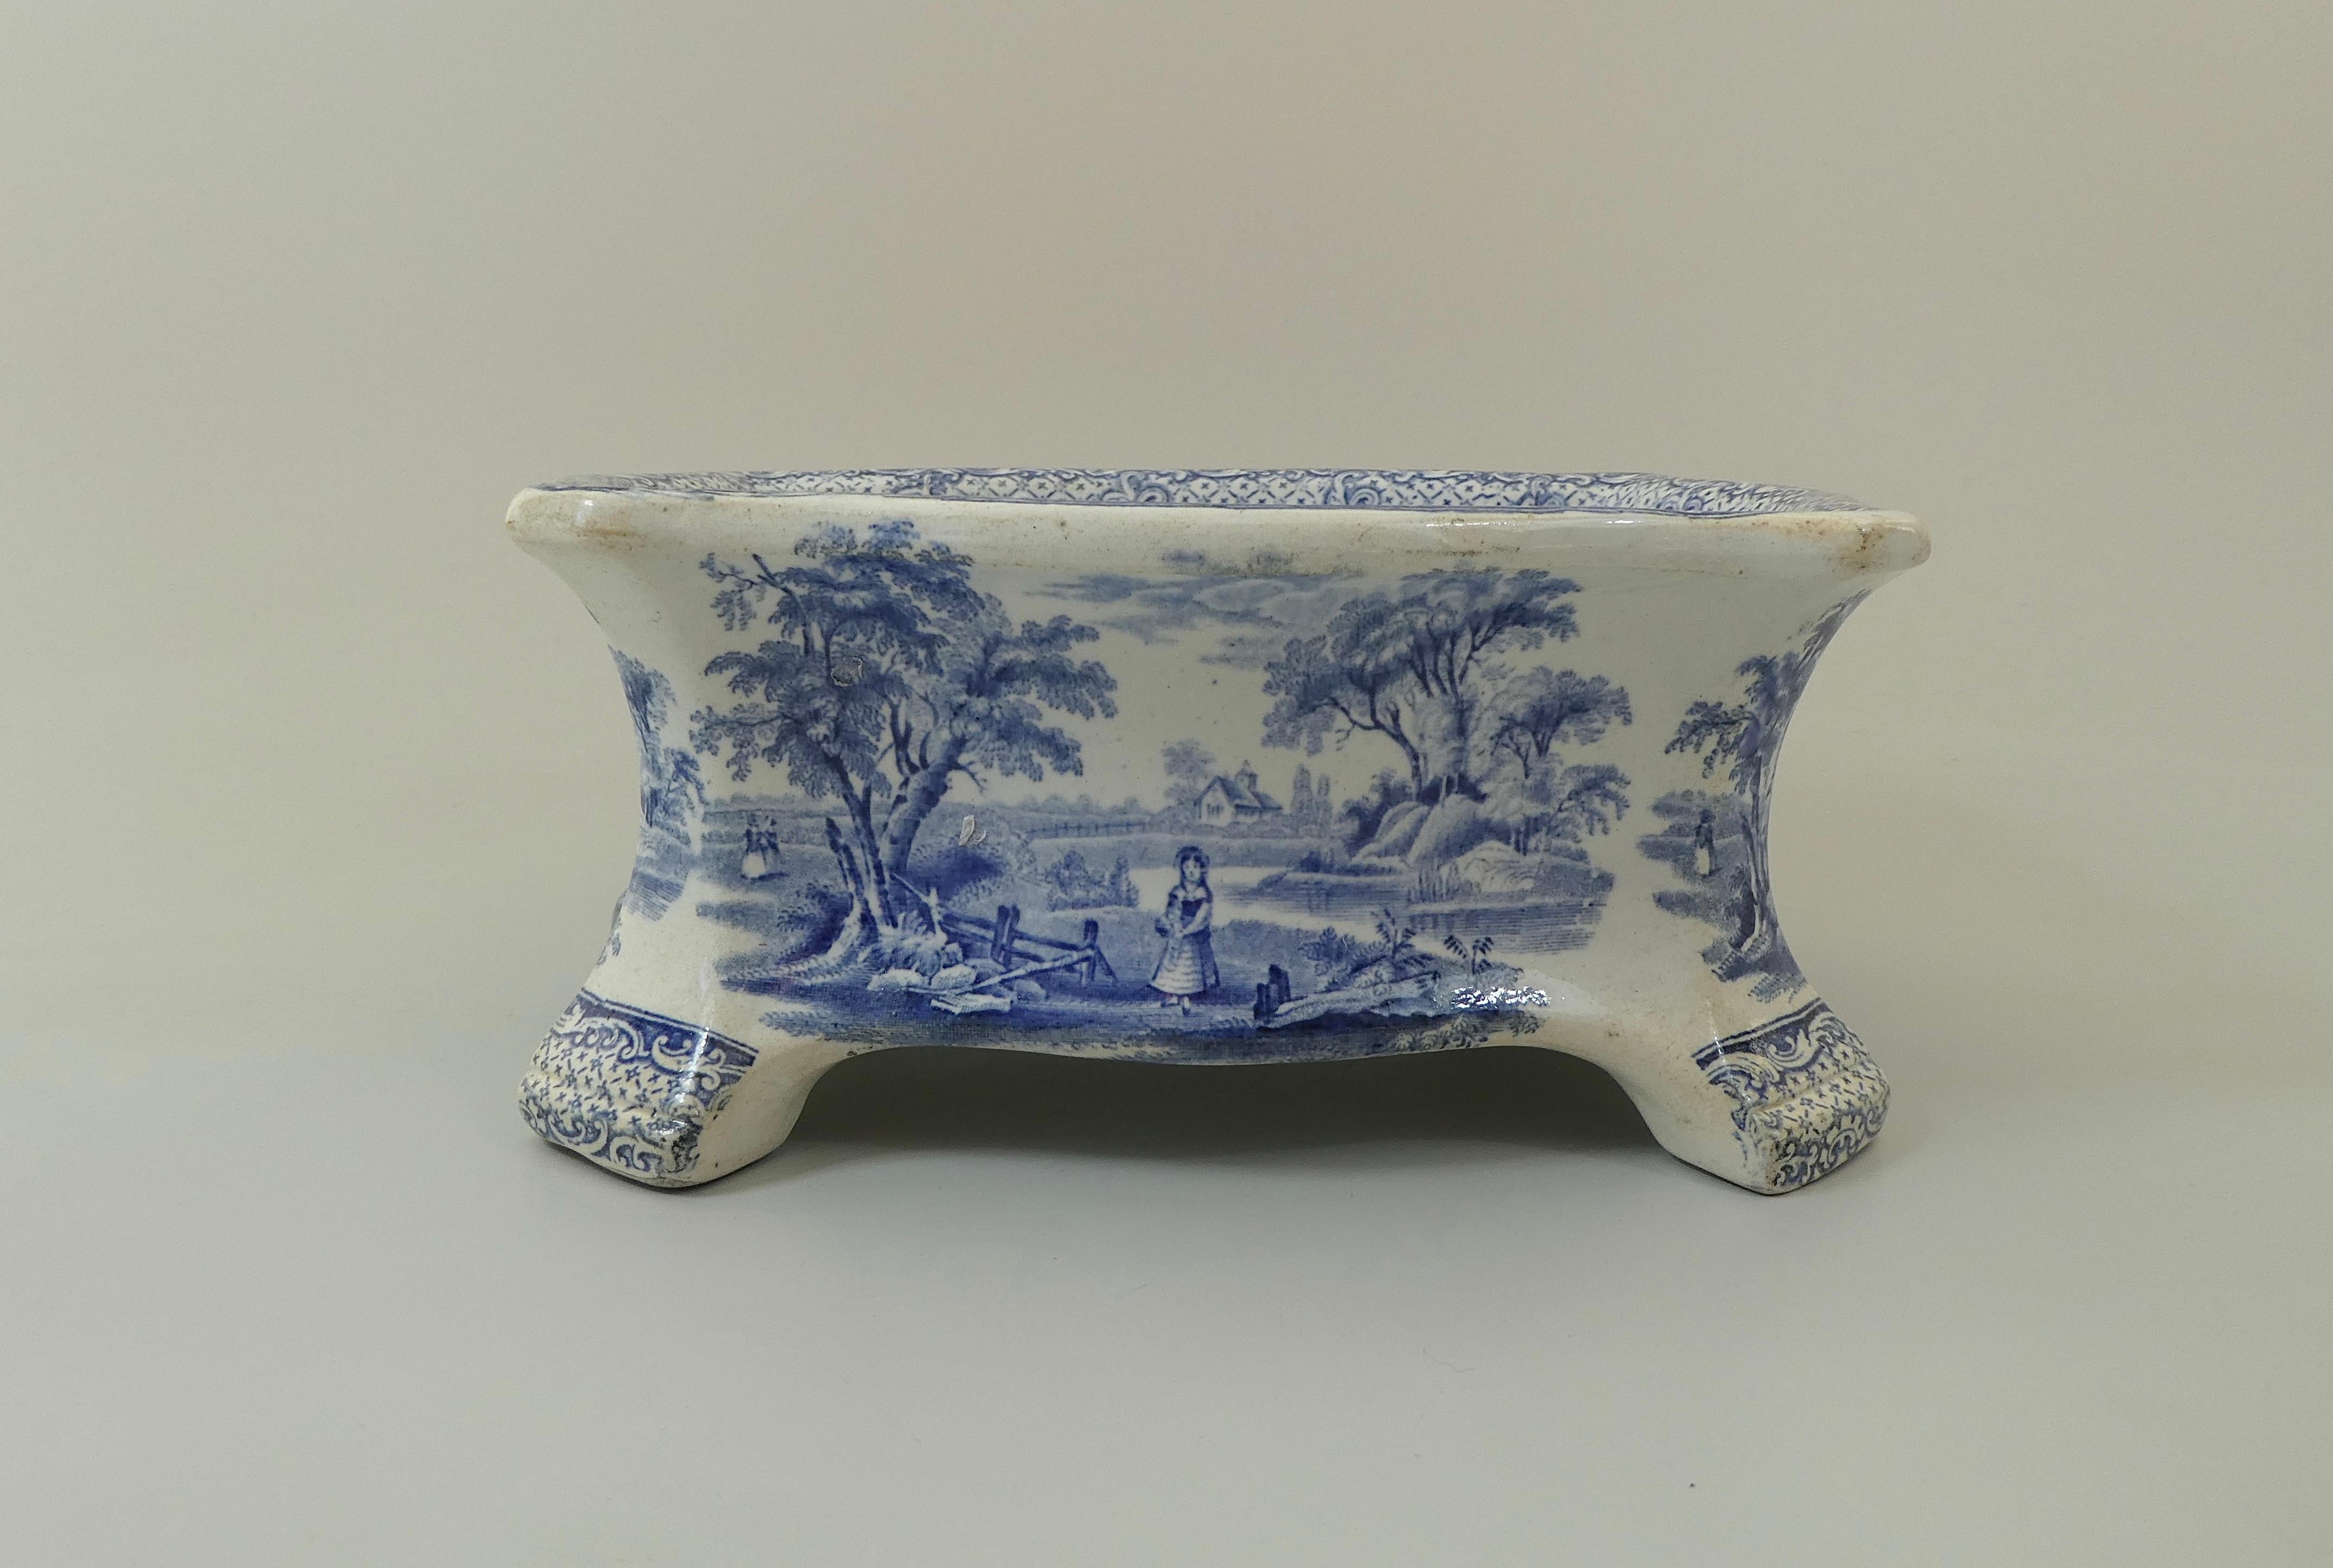 A rare Ridgway pottery dog bowl, circa 1840. The shaped dog bowl, set upon four moulded feet, and printed in underglaze blue, with figures in a rural landscape. within a swag and scroll border. The exterior printed with the same scene.
Printed mark